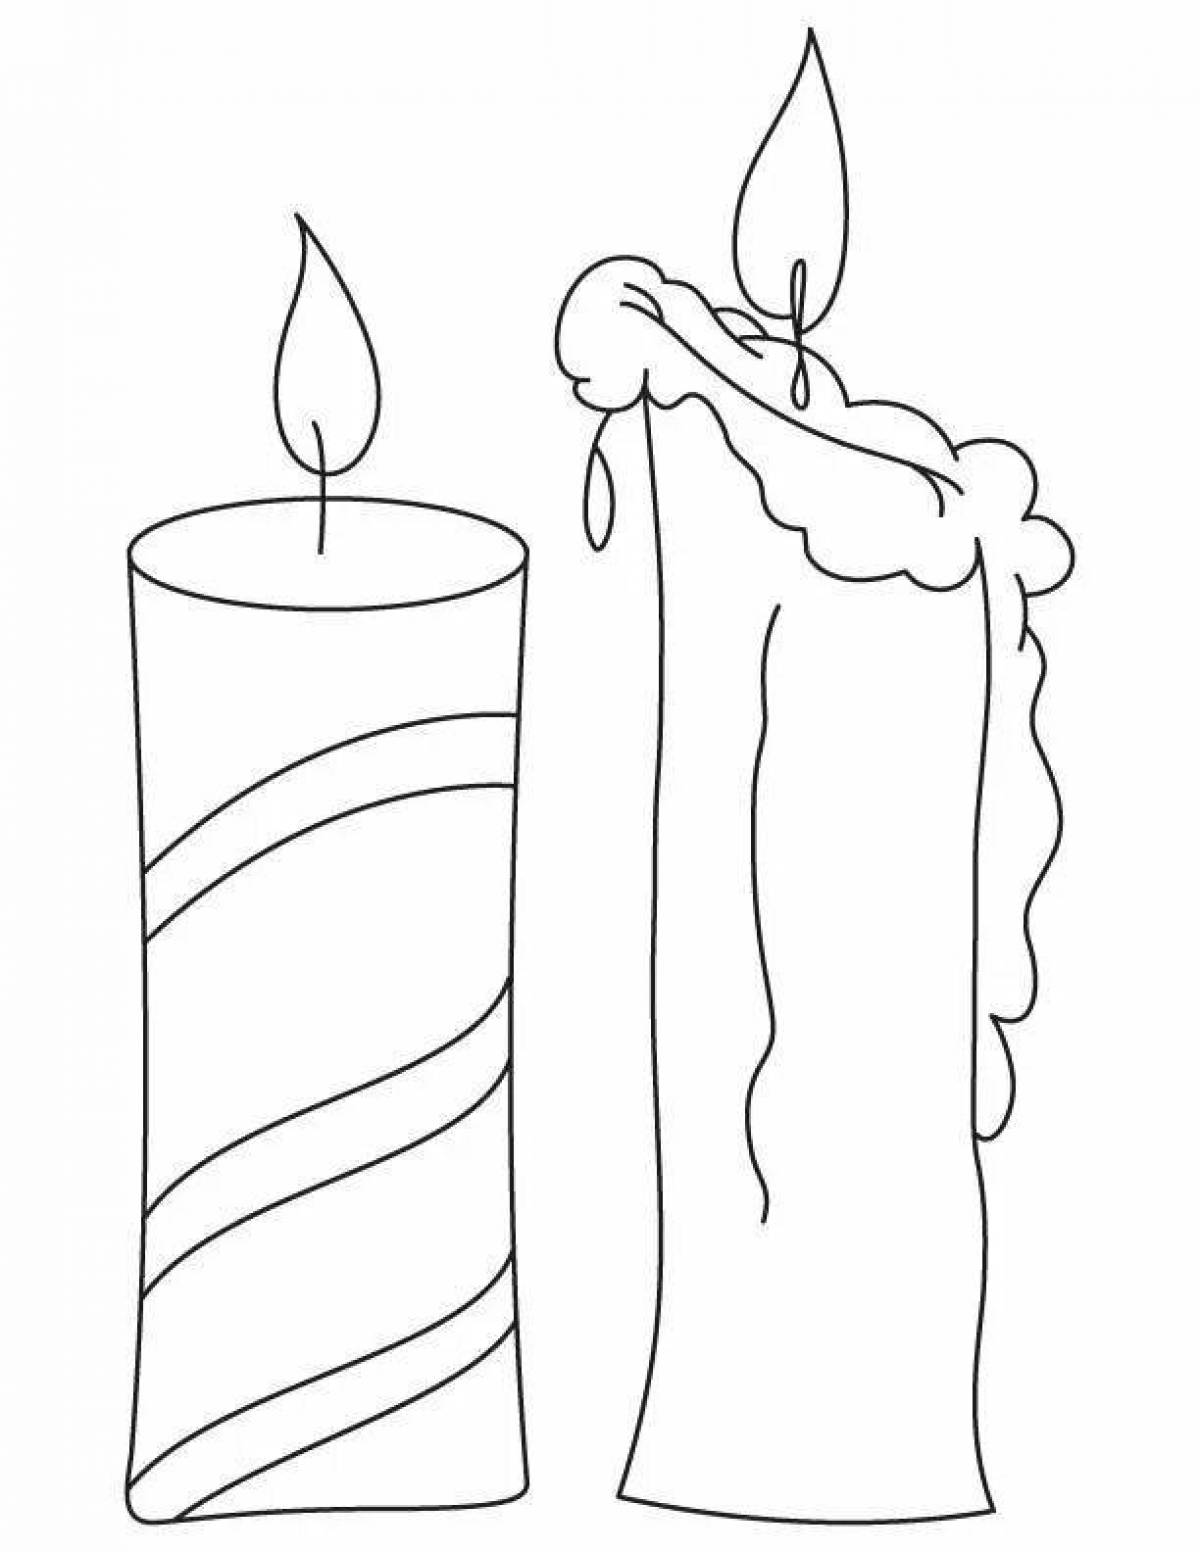 Delightful memory candle coloring page